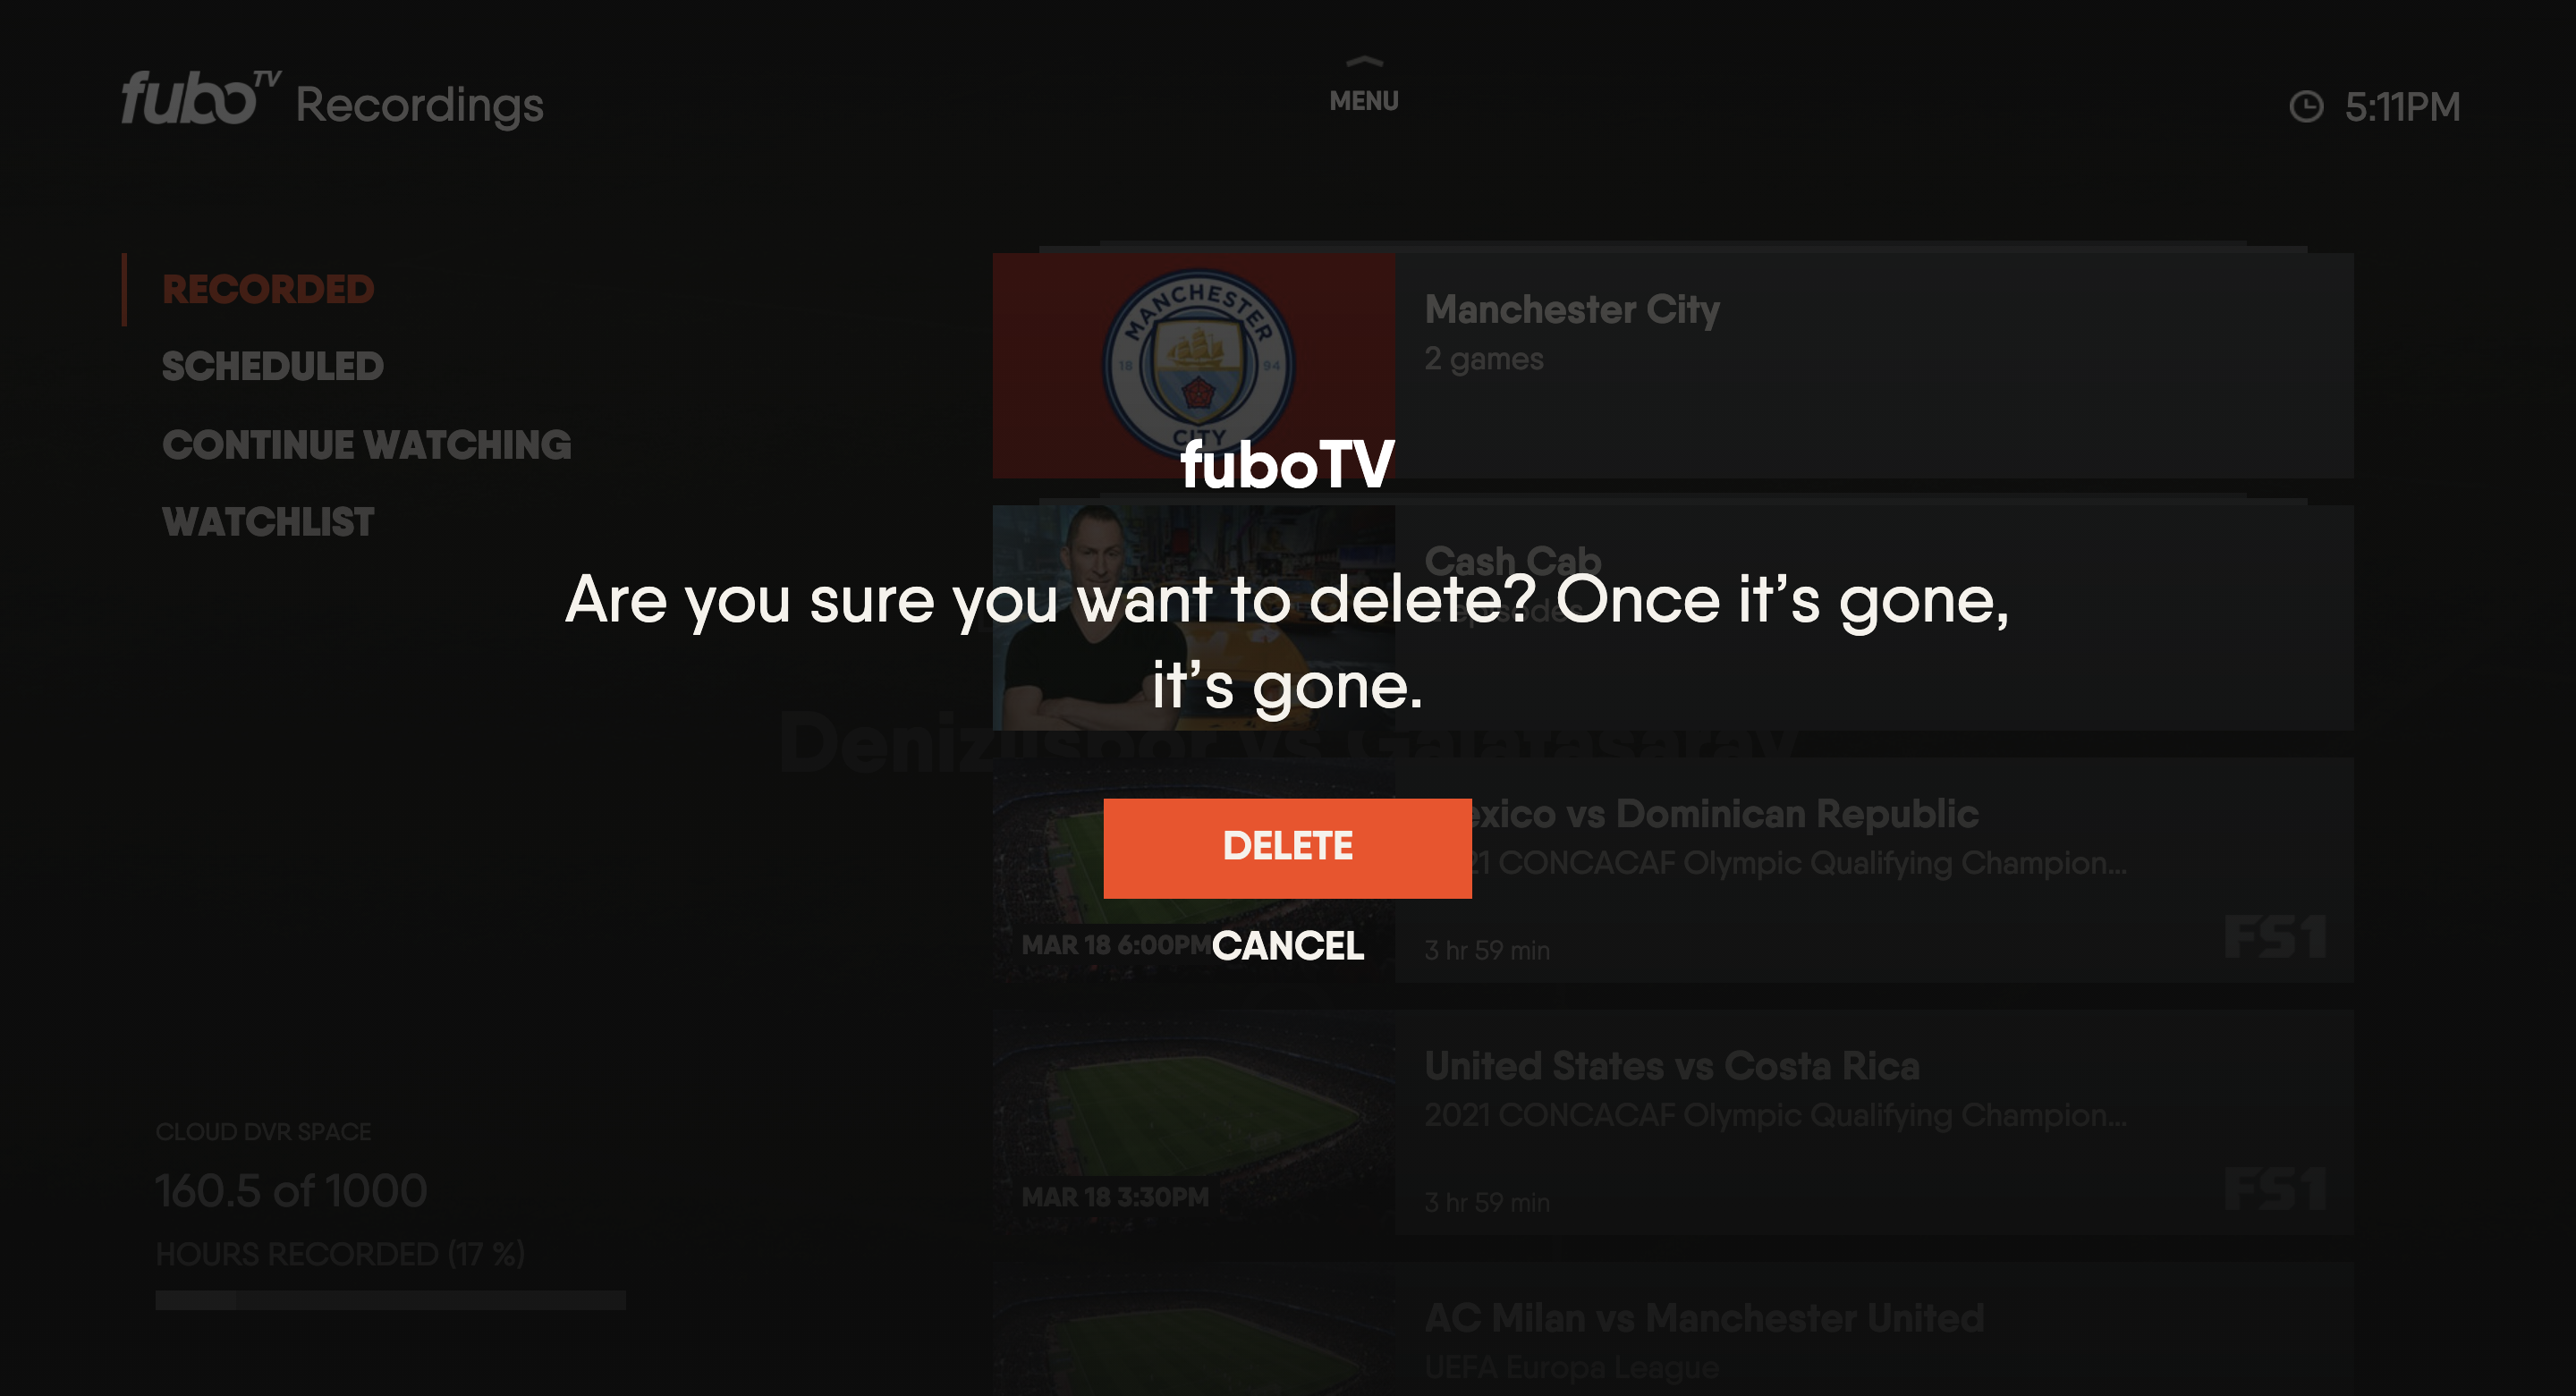 Confirmation screen for deleting a recording from the FuboTV app on a Vizio TV with the DELETE button highlighted